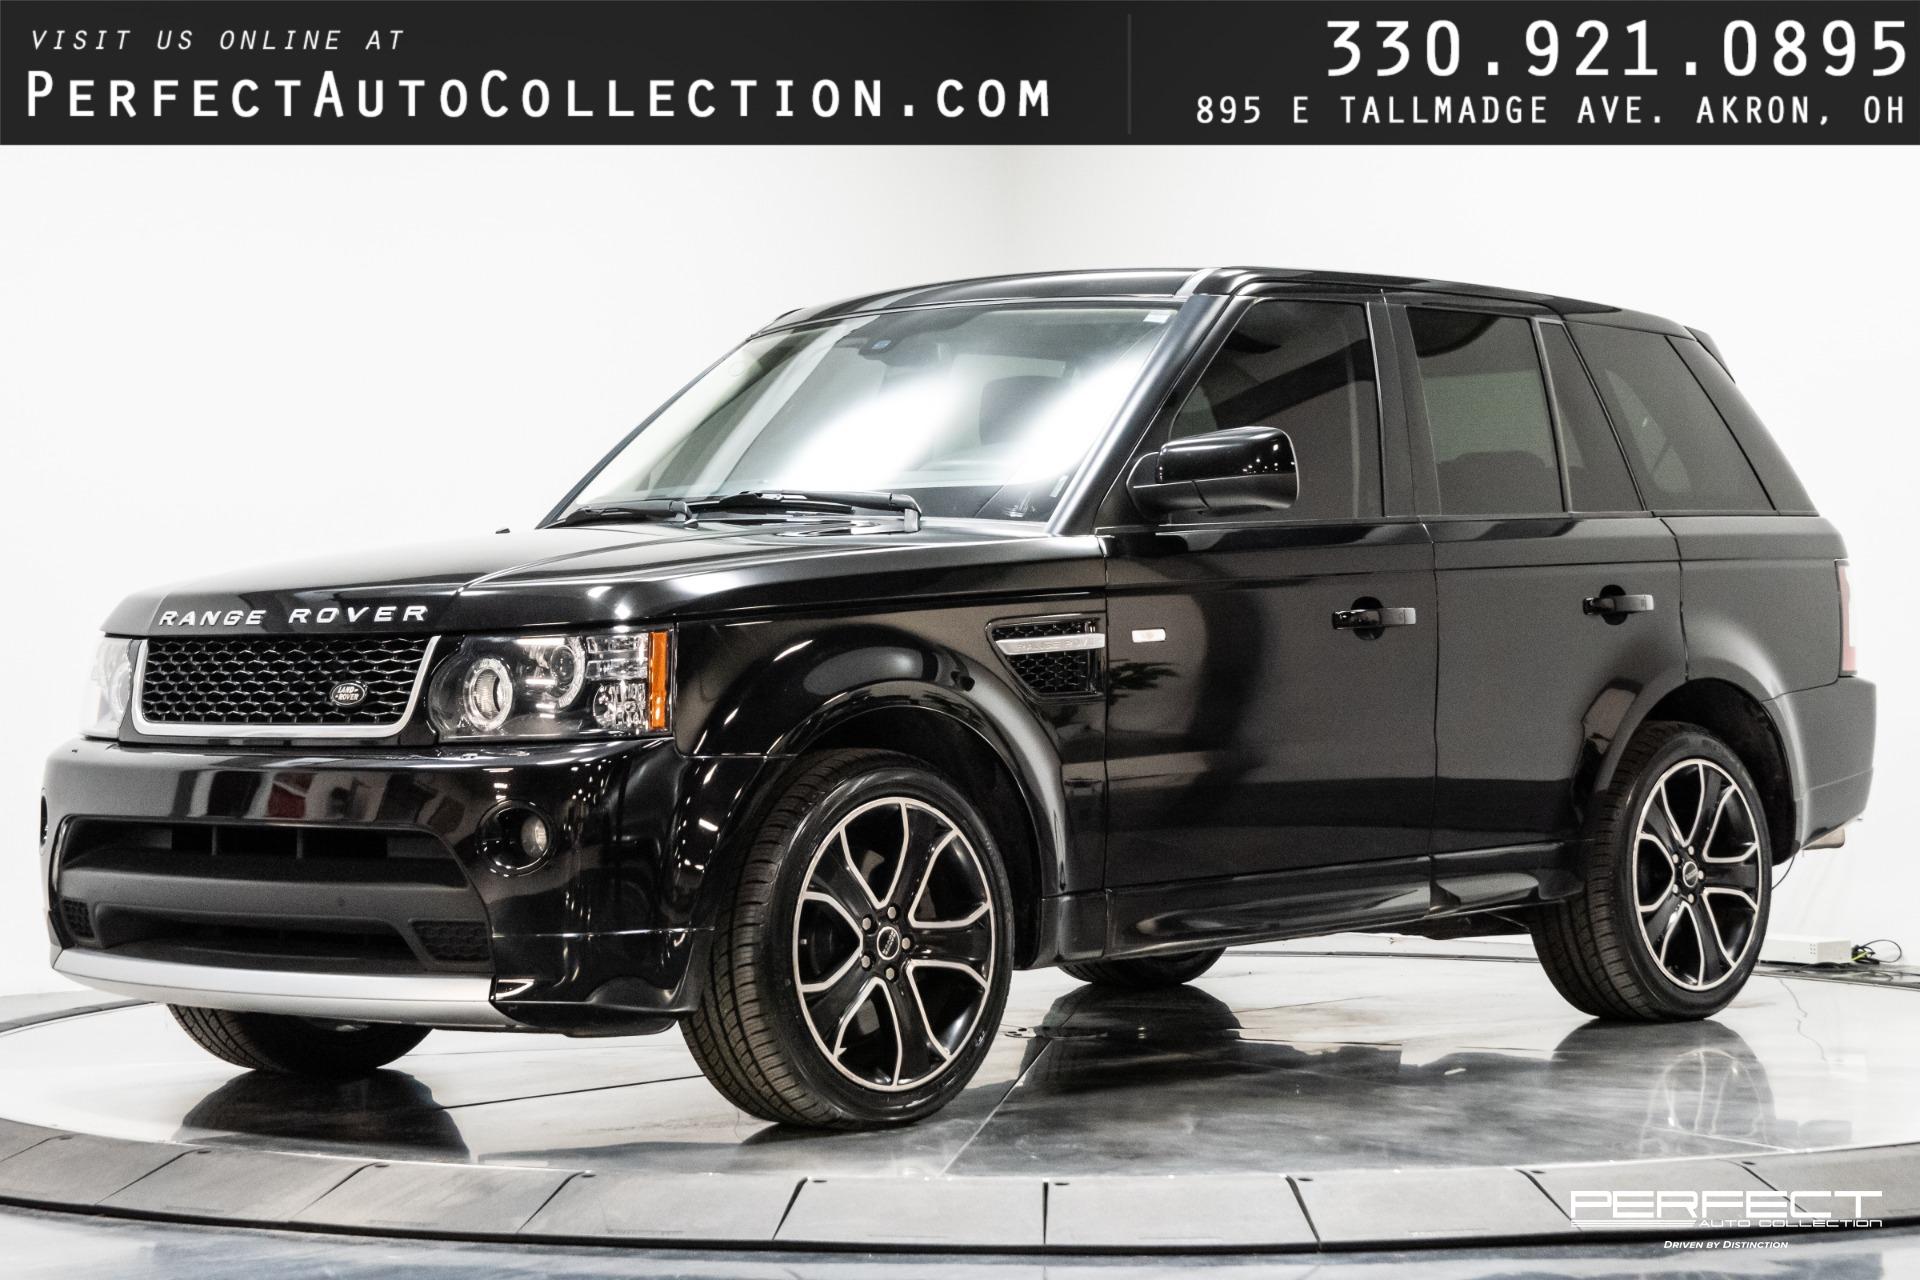 Used 2013 Land Rover Range Rover Sport GT Limited Edition Sale (Sold) | Perfect Auto Collection Stock #DA765075